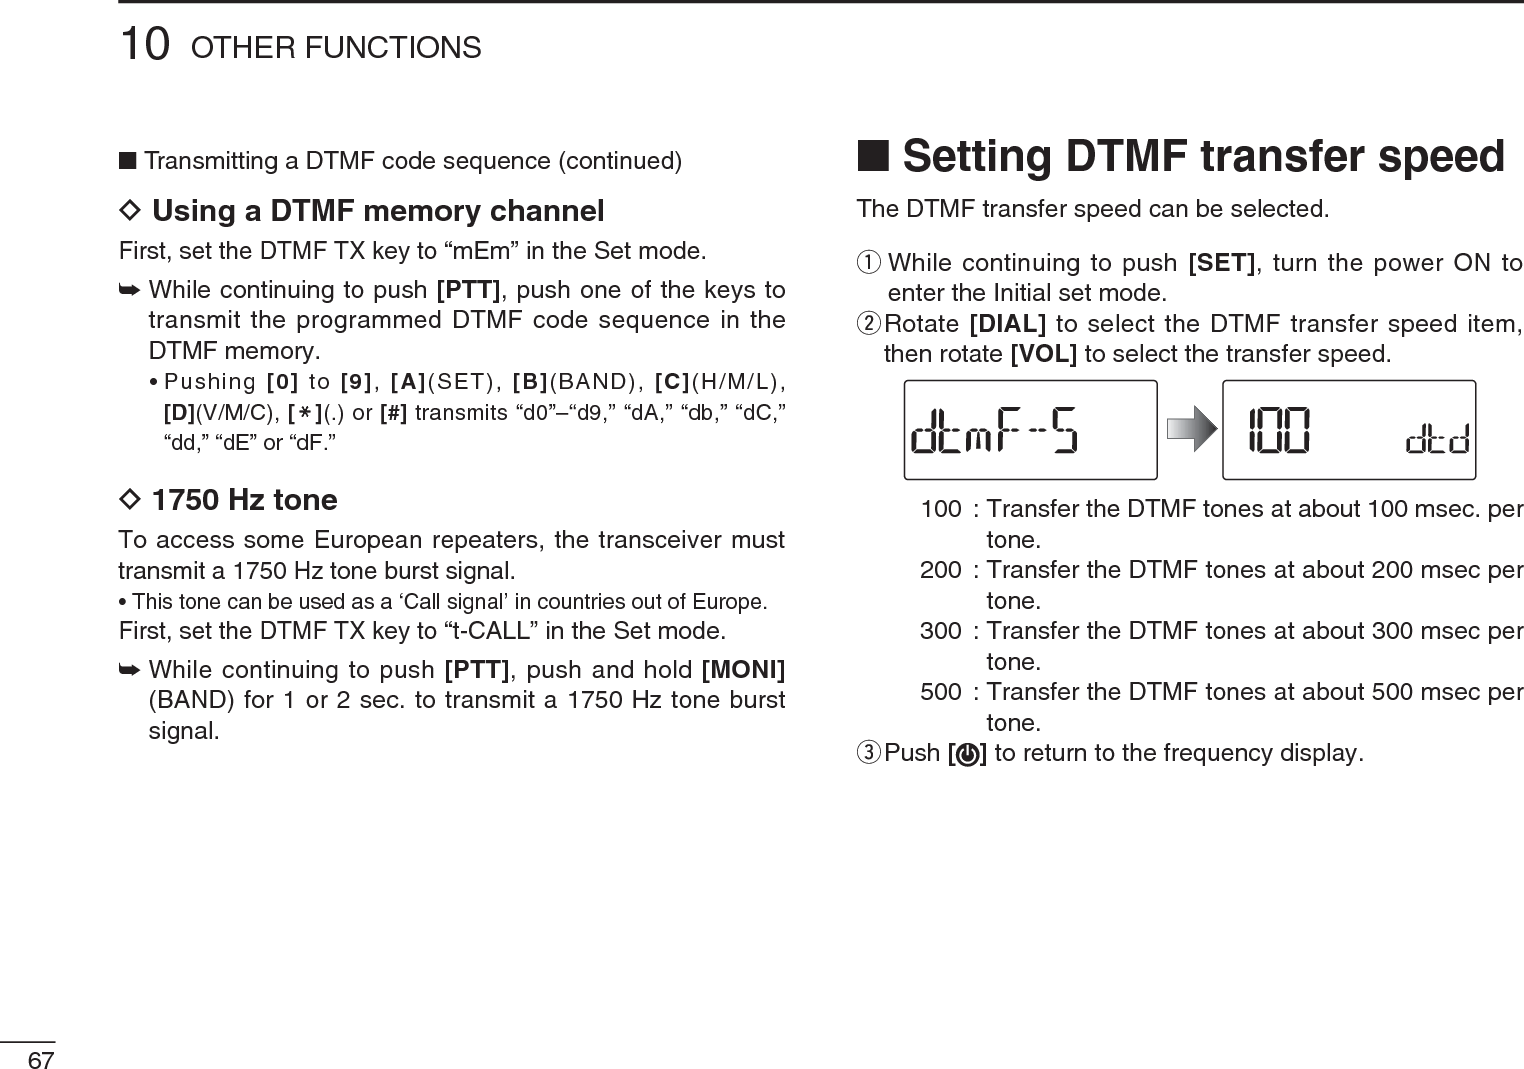 NTransmitting a DTMF code sequence (continued)DUsing a DTMF memory channelFirst, set the DTMF TX key to “mEm” in the Set mode.±While continuing to push [PTT], push one of the keys to transmit the programmed DTMF code sequence in the DTMF memory.• Pushing [0] to [9], [A](SET), [B](BAND), [C](H/M/L), [D](V/M/C), [M](.) or [#] transmits “d0”–“d9,” “dA,” “db,” “dC,” “dd,” “dE” or “dF.”D1750 Hz toneTo access some European repeaters, the transceiver must transmit a 1750 Hz tone burst signal. • This tone can be used as a ‘Call signal’ in countries out of Europe.First, set the DTMF TX key to “t-CALL” in the Set mode.±While continuing to push [PTT], push and hold [MONI](BAND) for 1 or 2 sec. to transmit a 1750 Hz tone burst signal.N Setting DTMF transfer speedThe DTMF transfer speed can be selected.q  While continuing to push [SET], turn the power ON to enter the Initial set mode.w  Rotate [DIAL] to select the DTMF transfer speed item, then rotate [VOL] to select the transfer speed.  100 : Transfer the DTMF tones at about 100 msec. per tone.200 : Transfer the DTMF tones at about 200 msec per tone.  300 : Transfer the DTMF tones at about 300 msec per tone.500 : Transfer the DTMF tones at about 500 msec per tone.e  Push [] to return to the frequency display.6710 OTHER FUNCTIONS